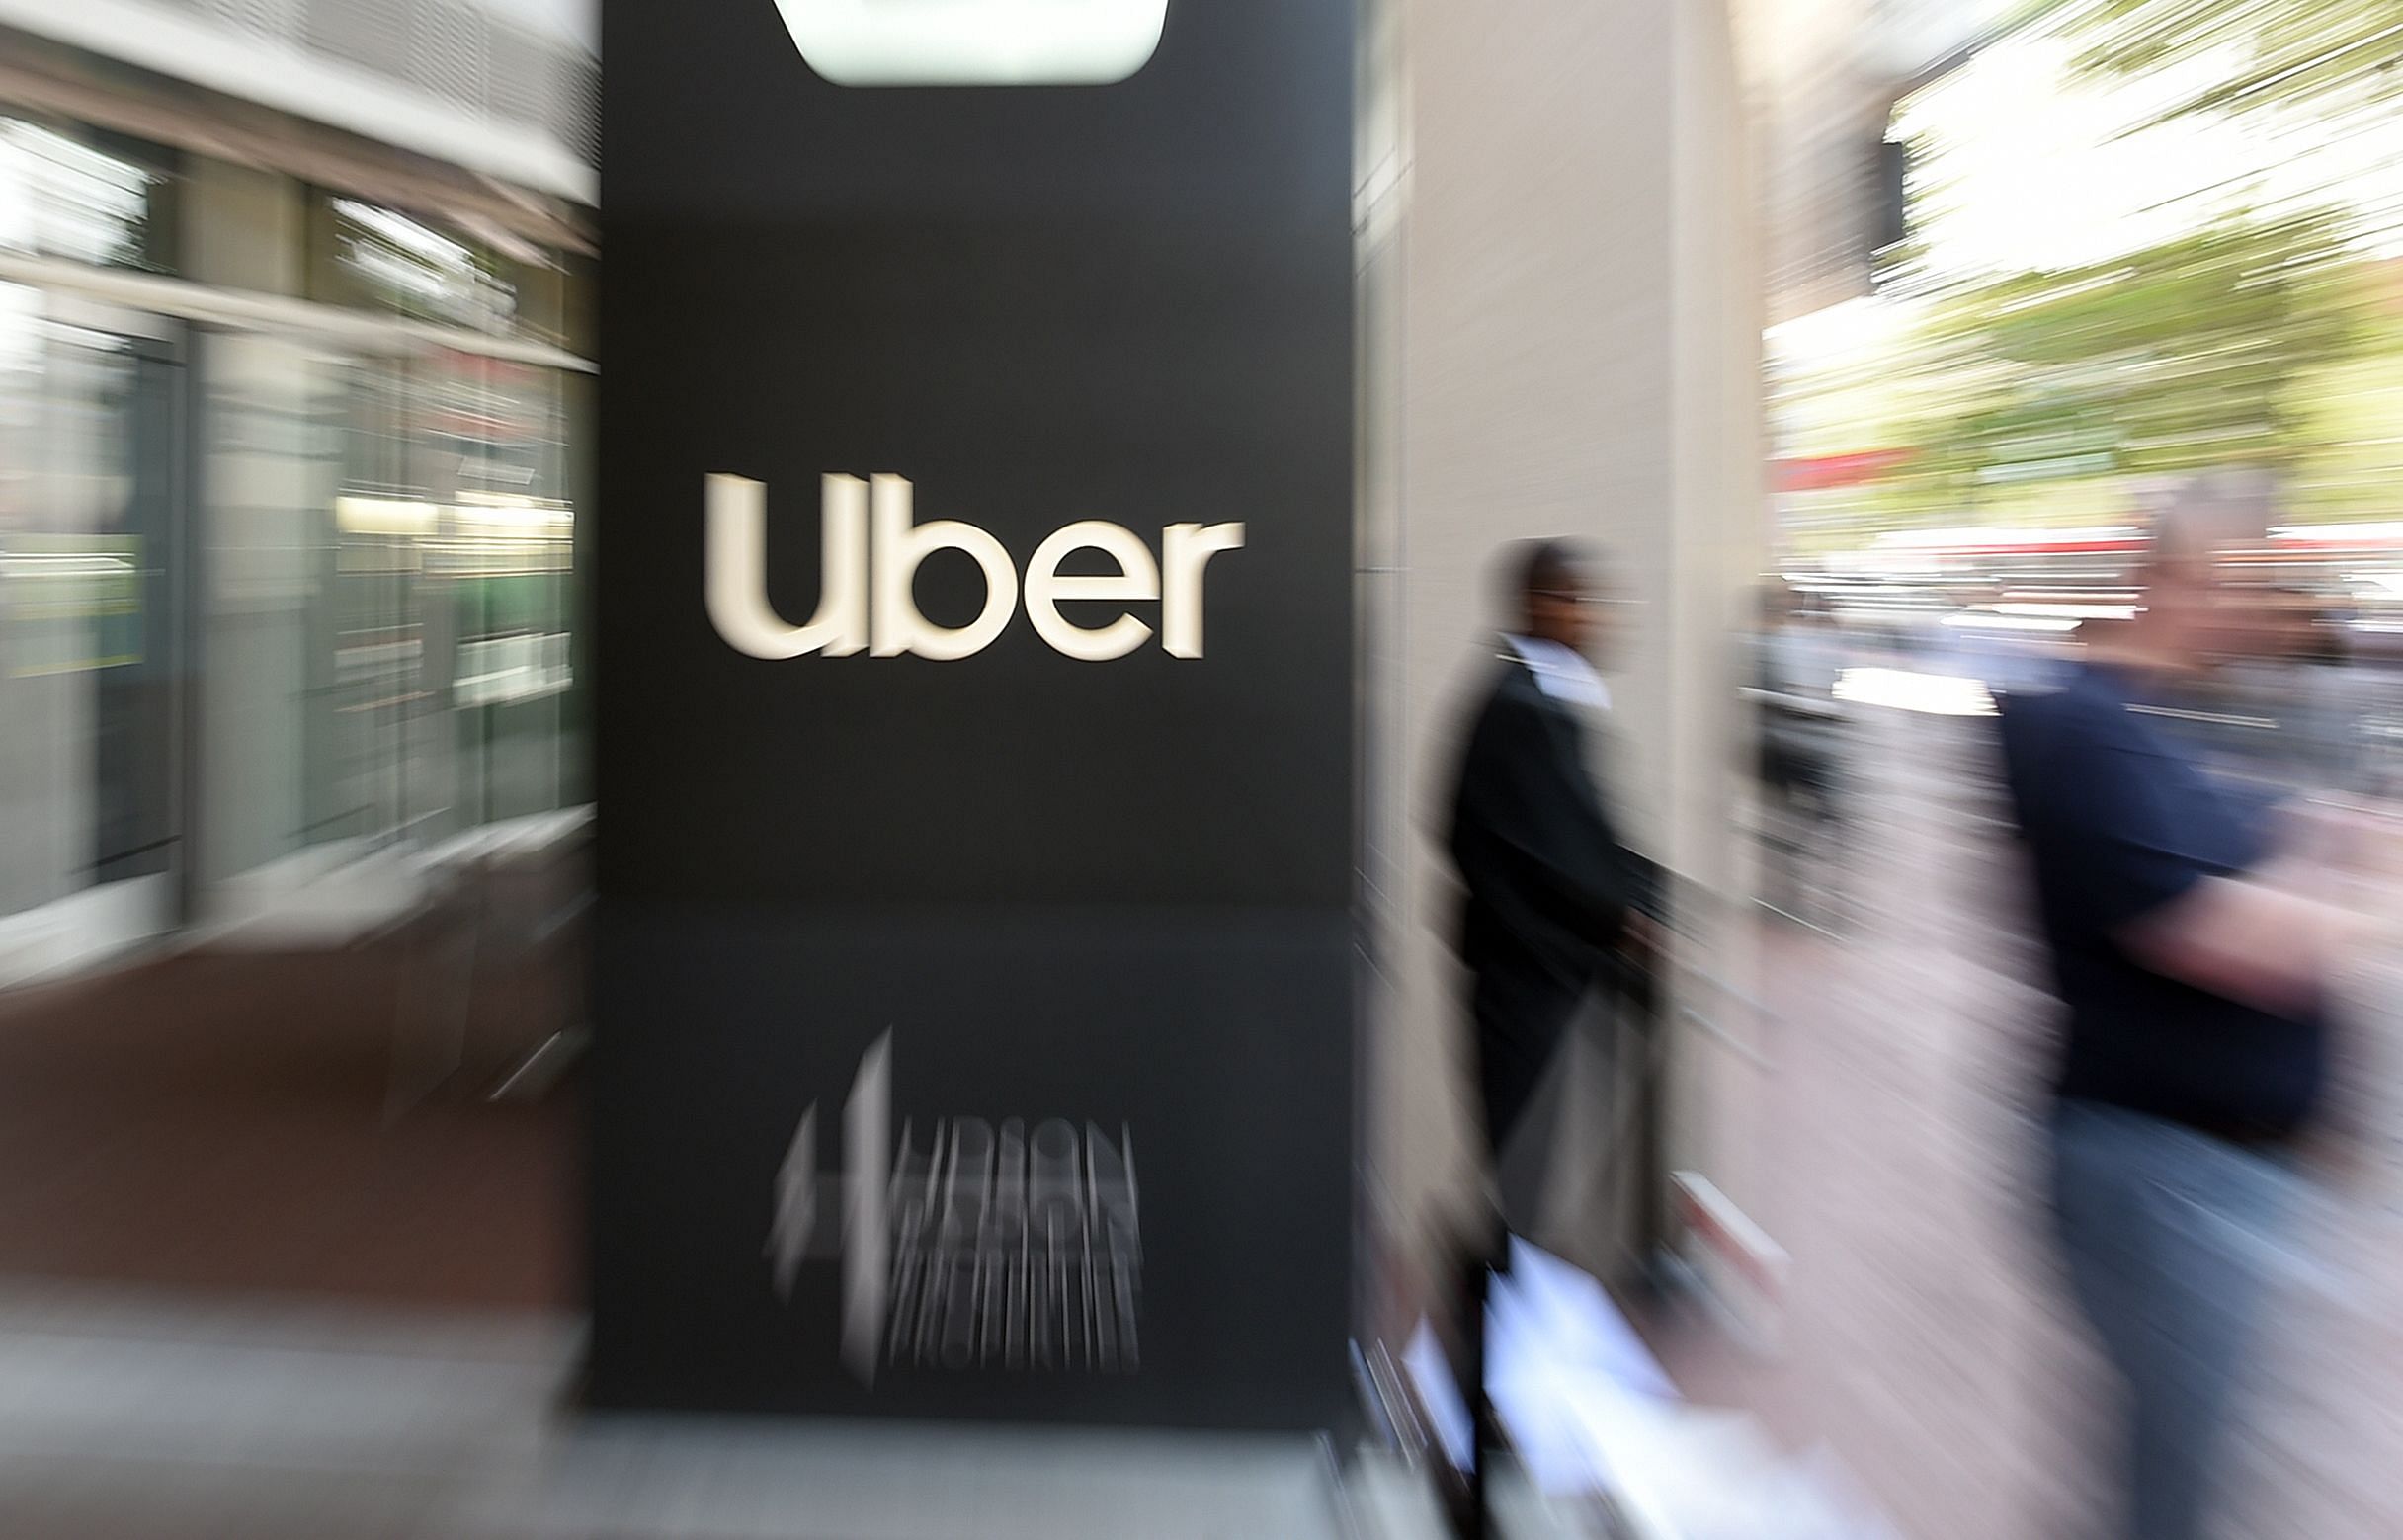 Uber is also discussing plans to cut around 20% of its staff because of the pandemic. (AFP photo)